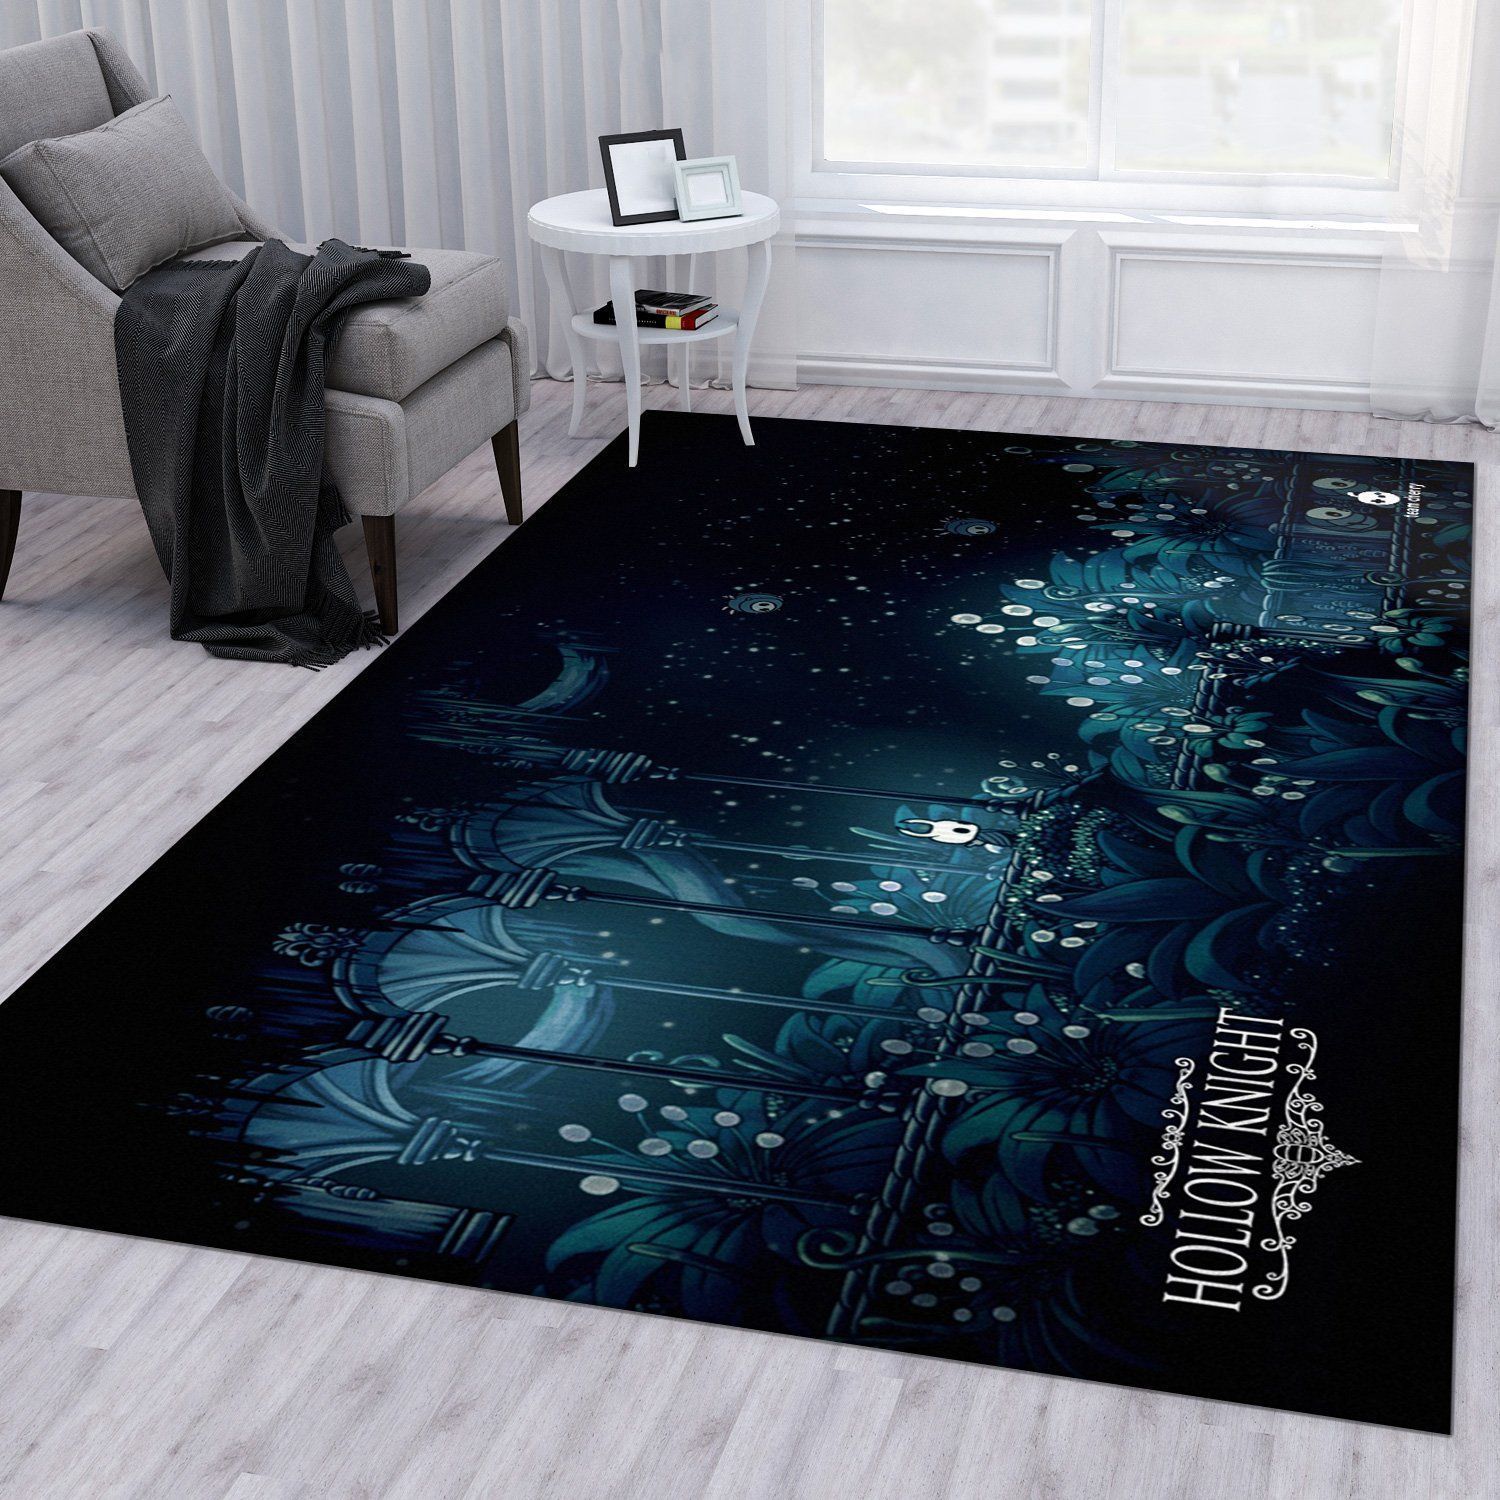 Hollow Knight Ver11 Rug Bedroom Rug Family Gift US Decor - Indoor Outdoor Rugs